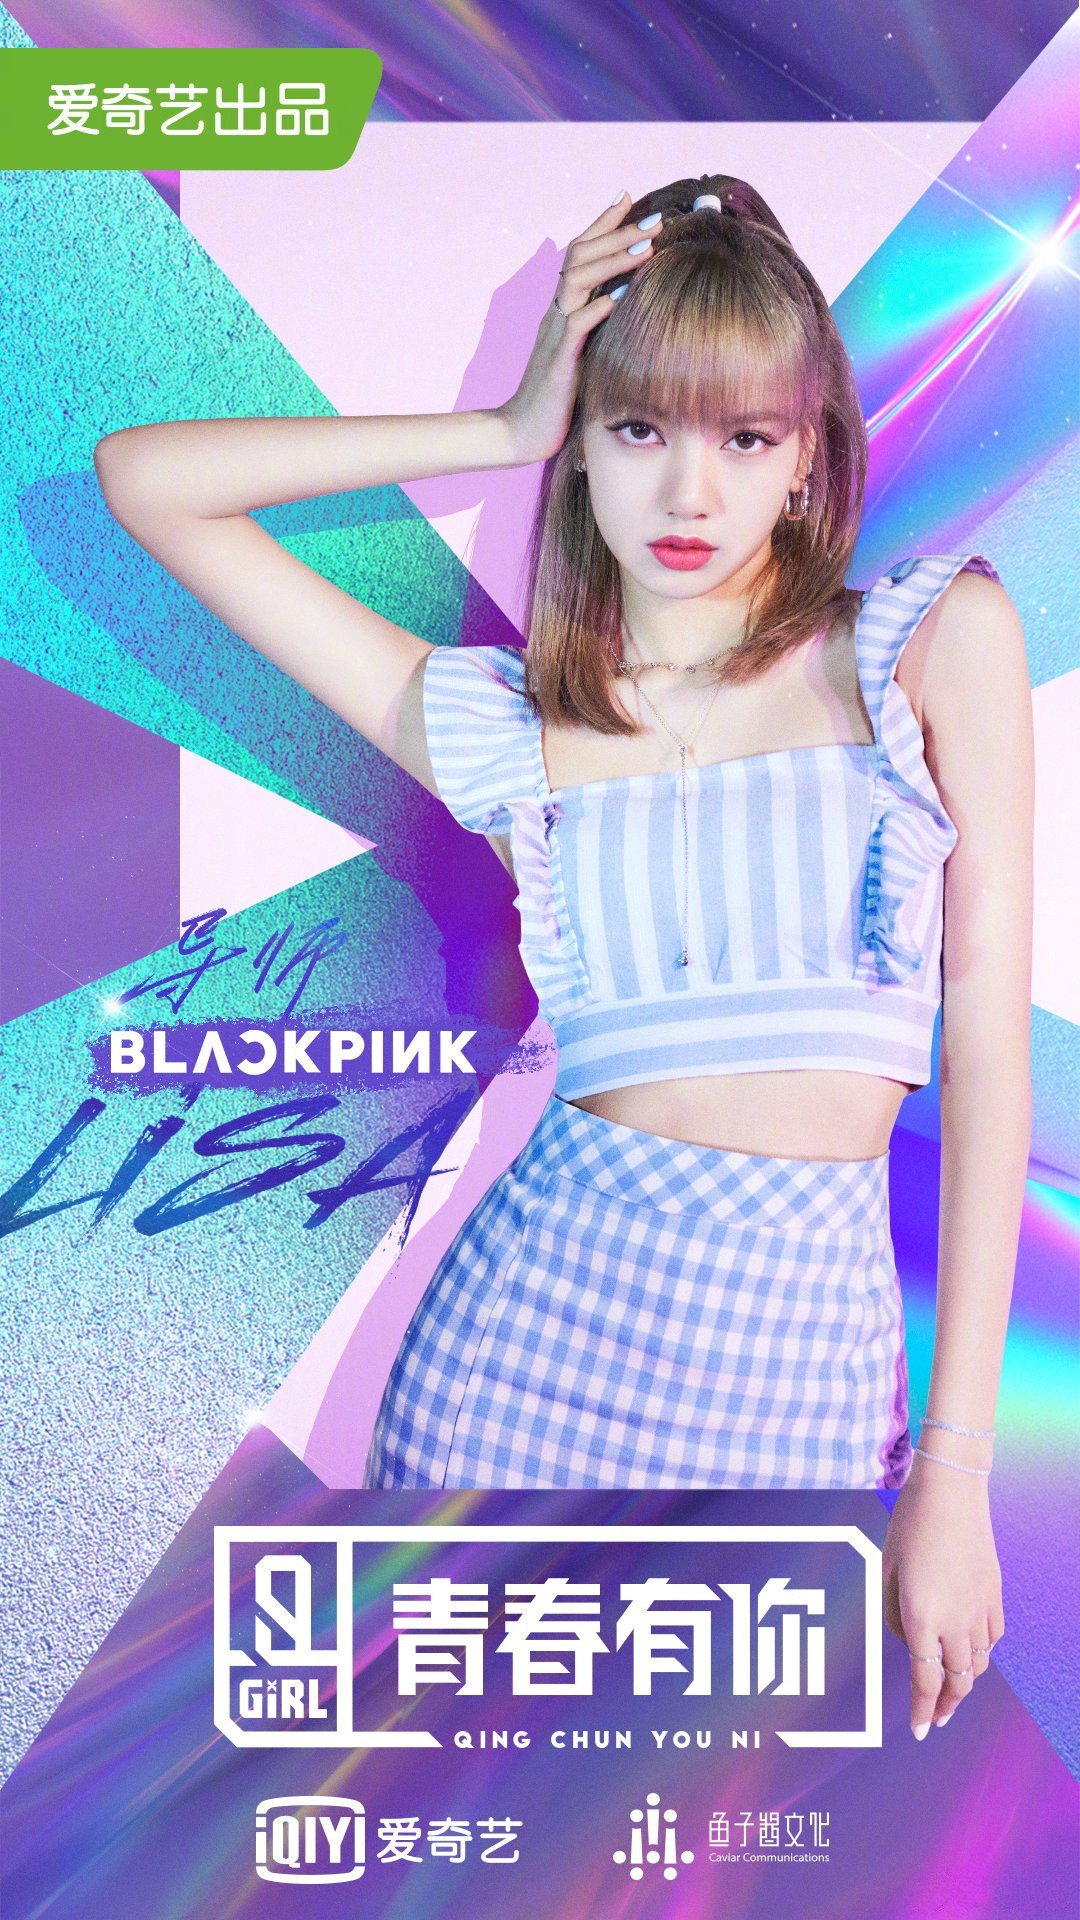 Blackpink Member Lisa Appointed As New Mentor For Iqiyi S Original Variety Show Qing Chun You Ni 2